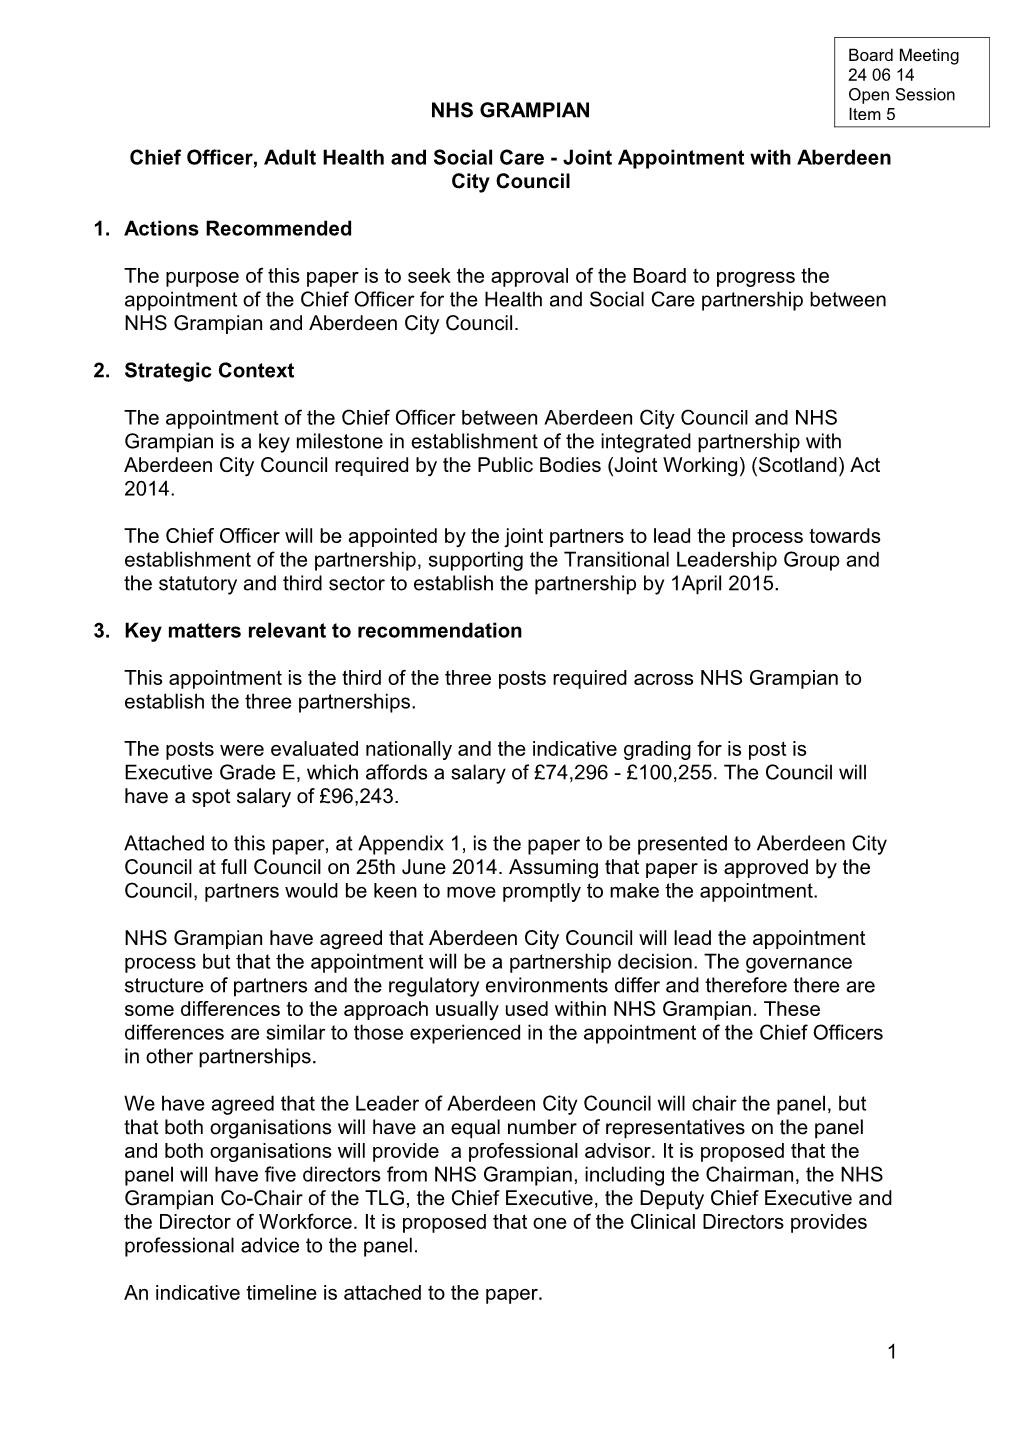 Item 5 for 24 June 14 Appointment of Chief Officer Abdn CHP